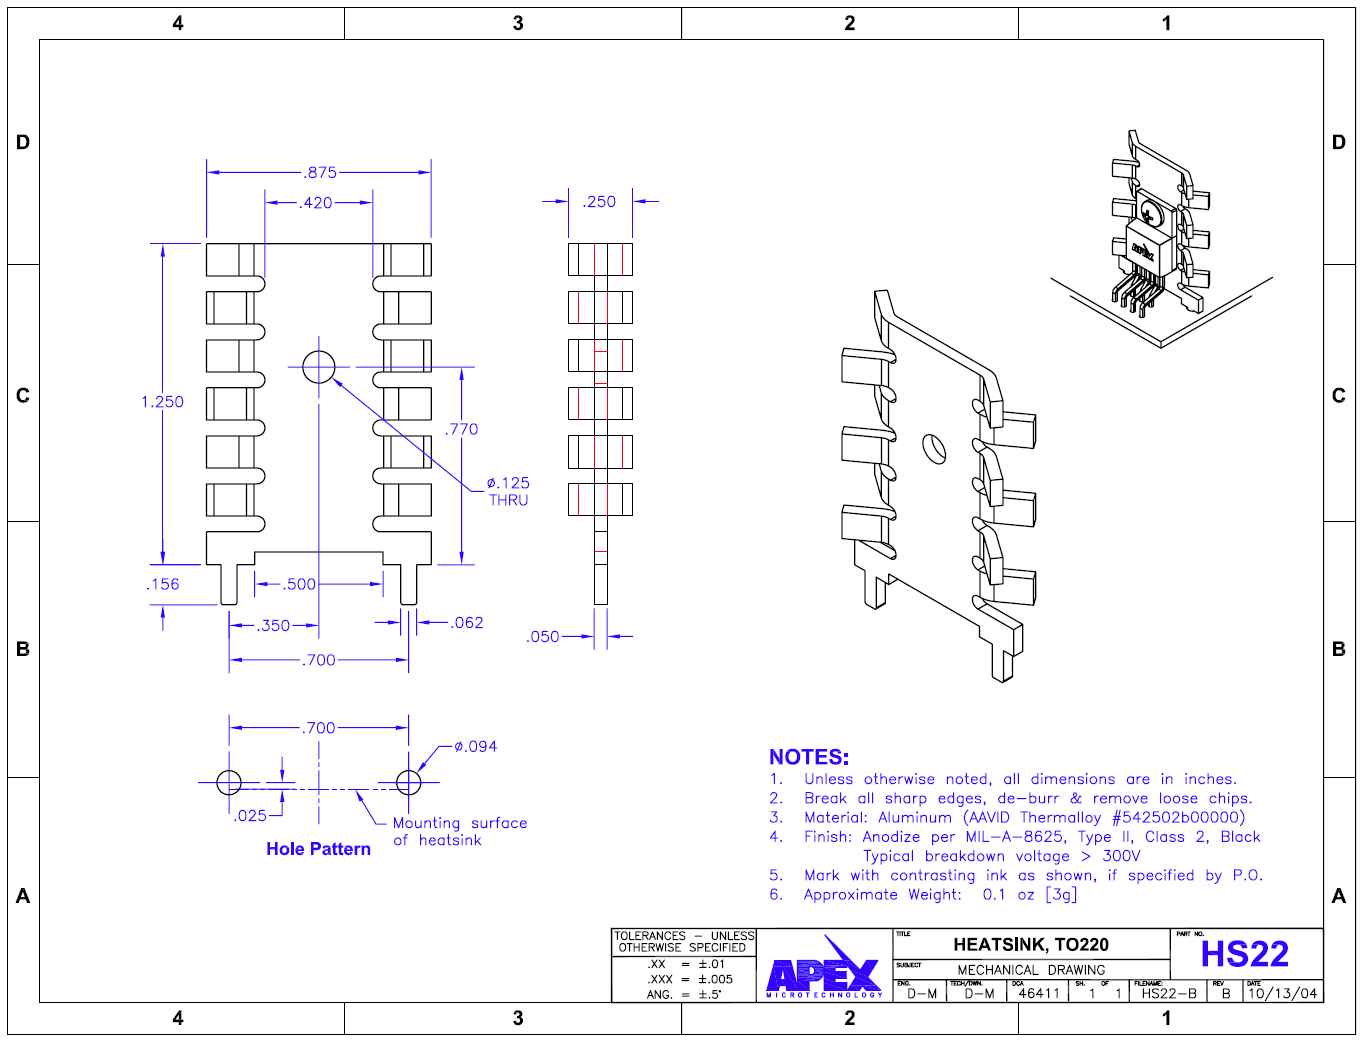 The technical drawing of a typical TO-220 heatsink. Image from www.digikey.com, retrieved 2013-05-29.